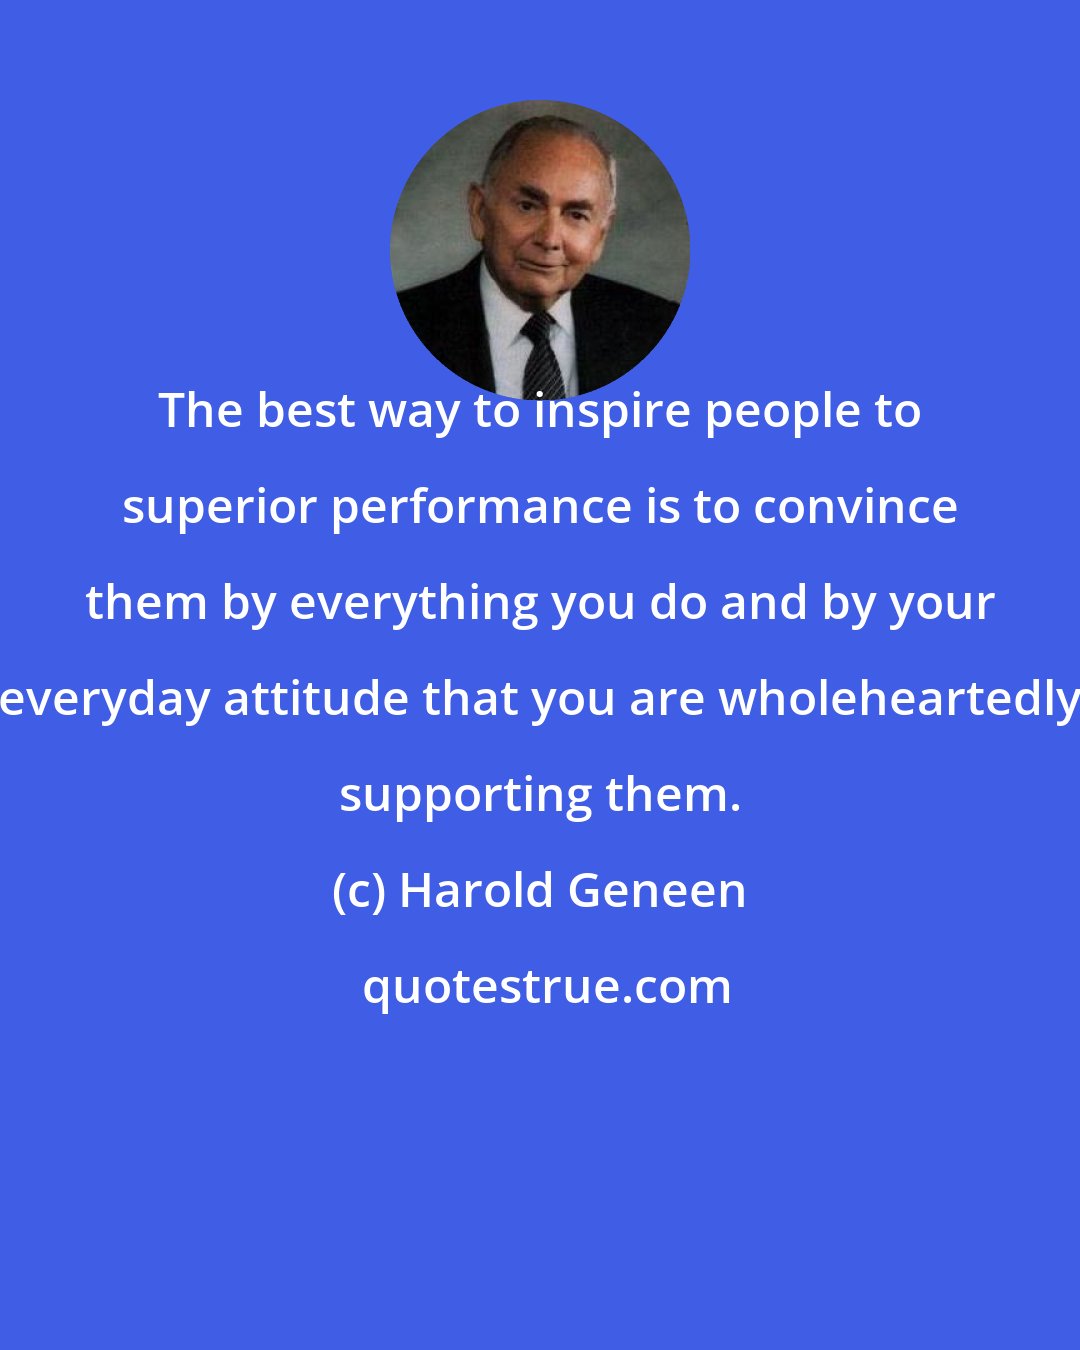 Harold Geneen: The best way to inspire people to superior performance is to convince them by everything you do and by your everyday attitude that you are wholeheartedly supporting them.